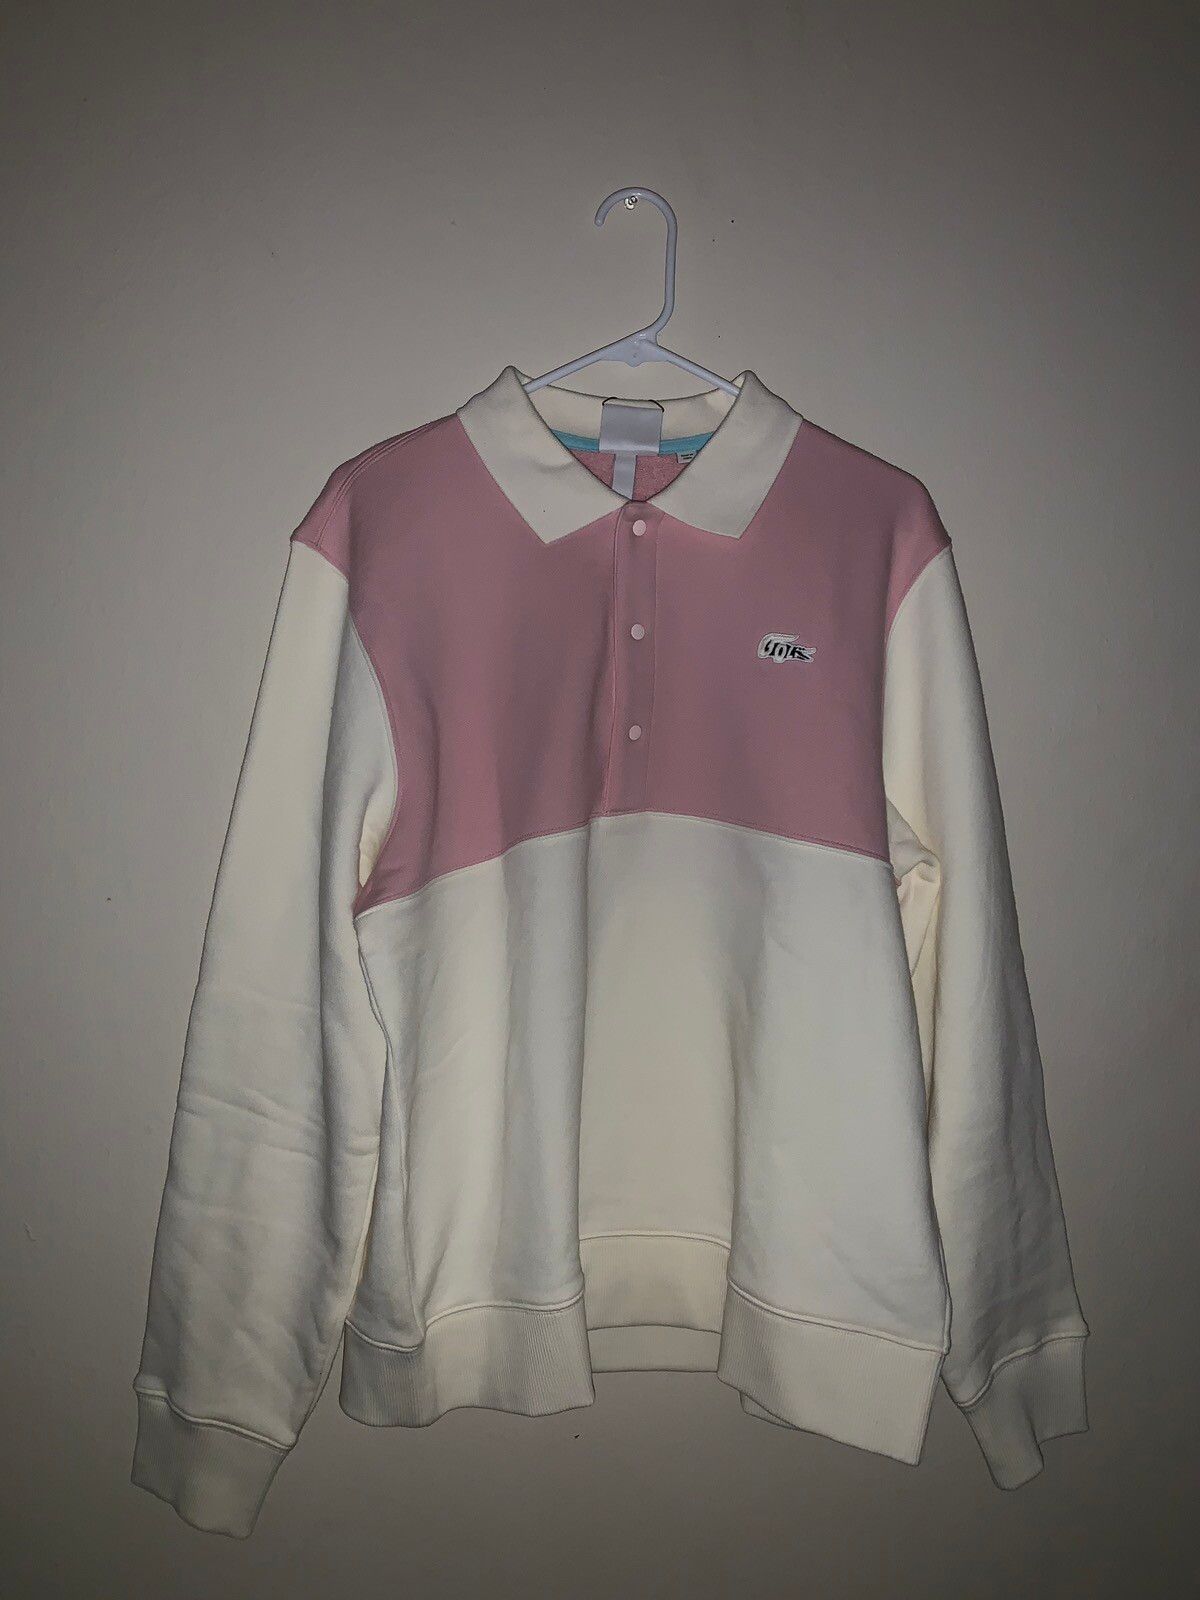 Golf Wang × Lacoste | Grailed